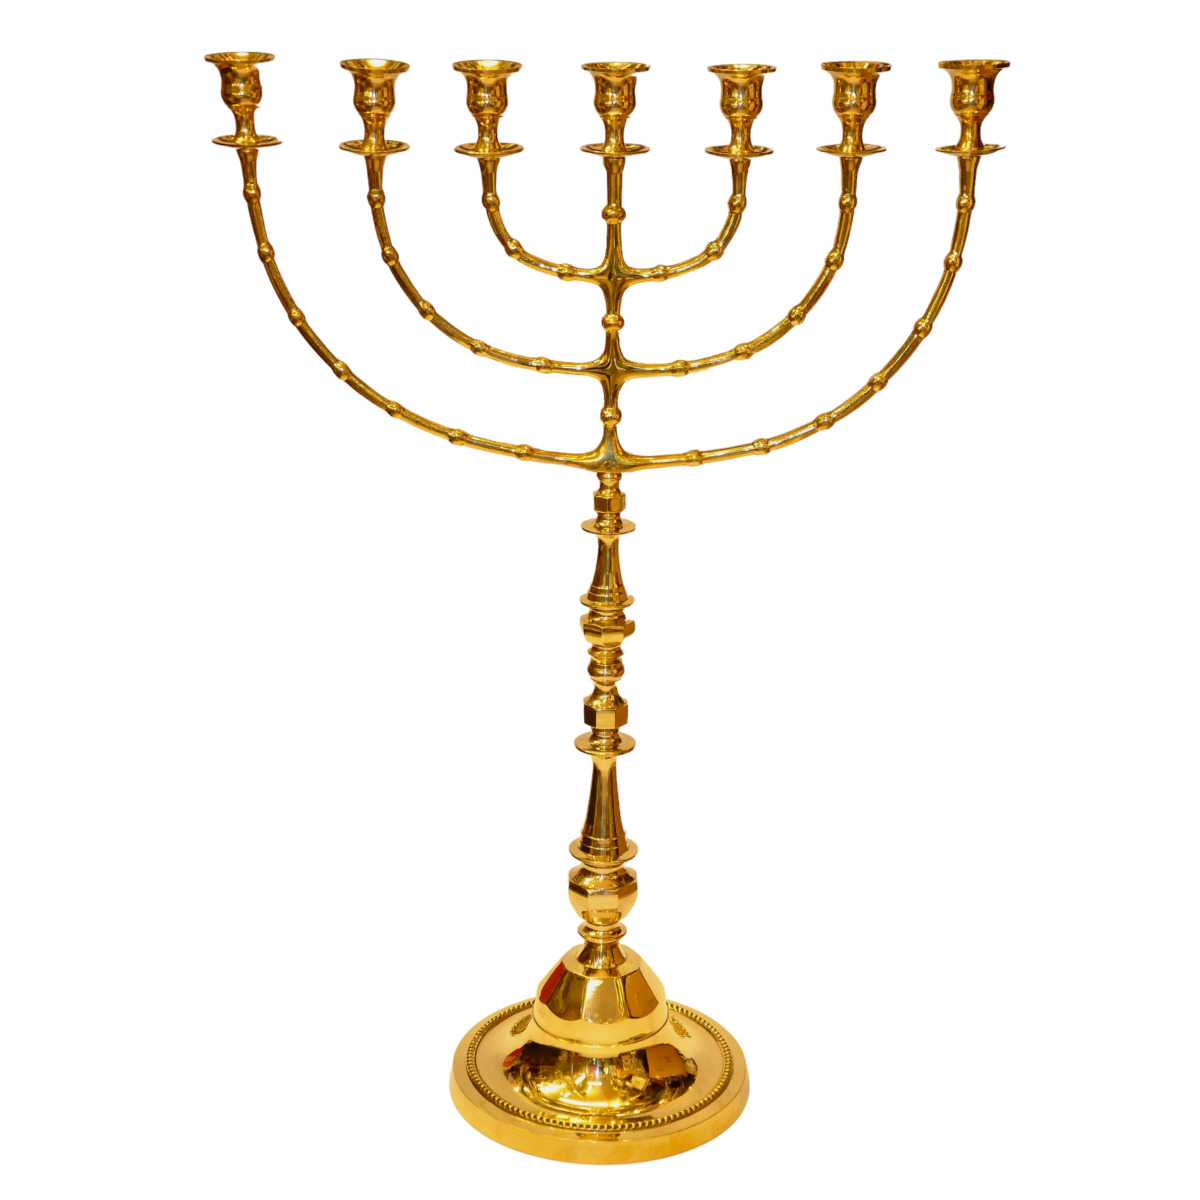 Huge Temple Menorah In Gold Plated From Holy Land Jerusalem 35.4″ / 90cm